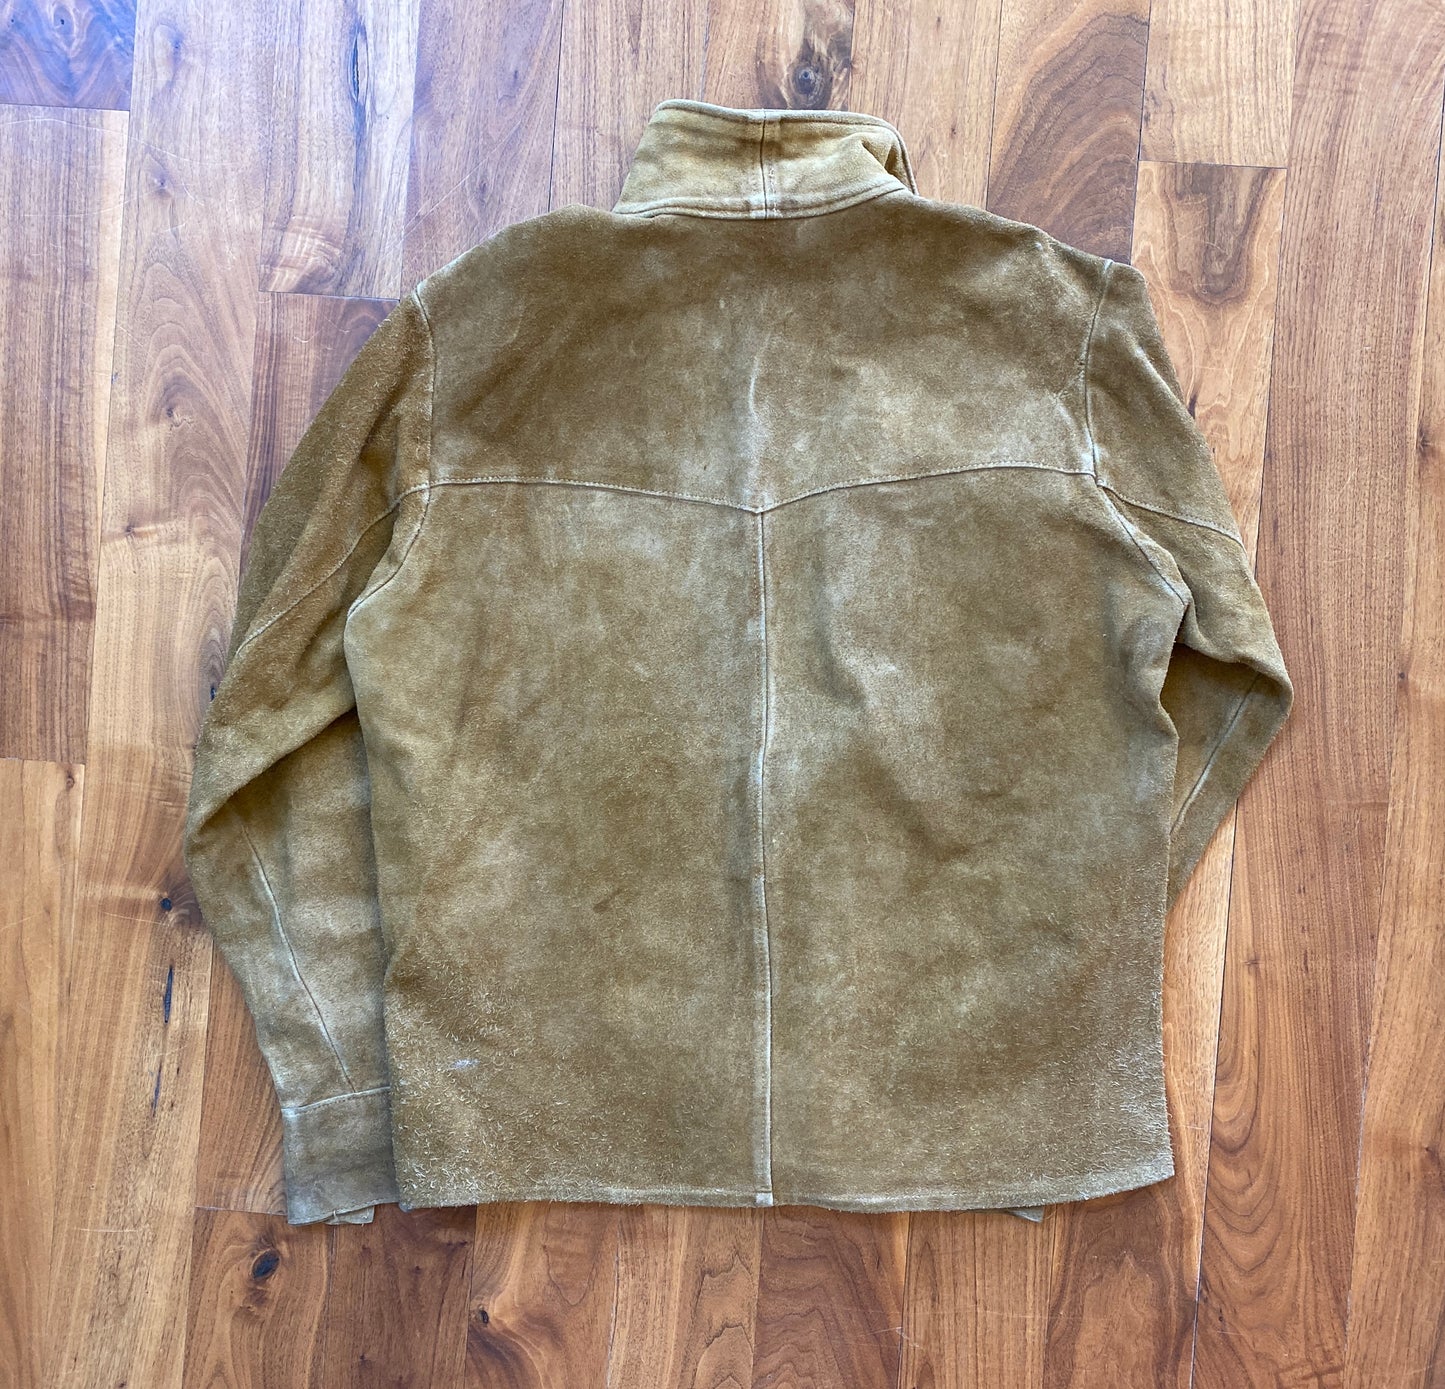 1960s Alaska Sleeping Bag Company "Ruff-Out" Pullover Leather Shirt Size M/L